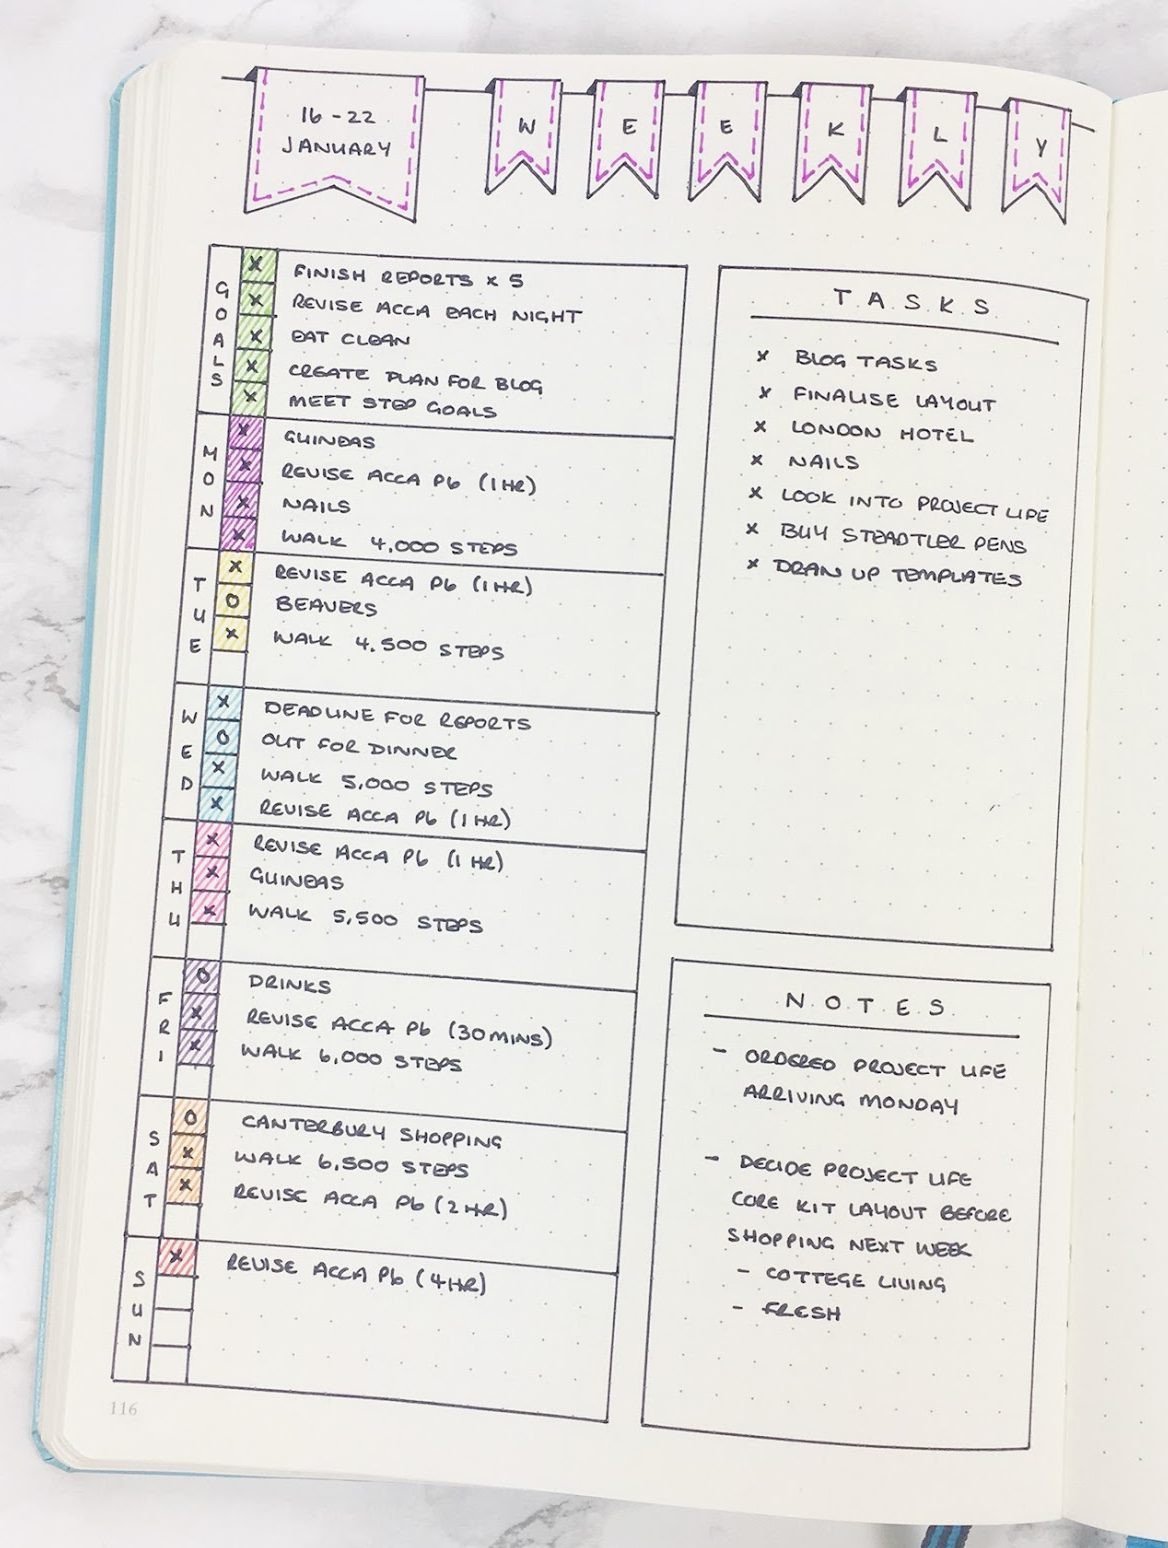 Bullet Journal Layout Templates 15 the Best Weekly Bullet Journal Layouts the